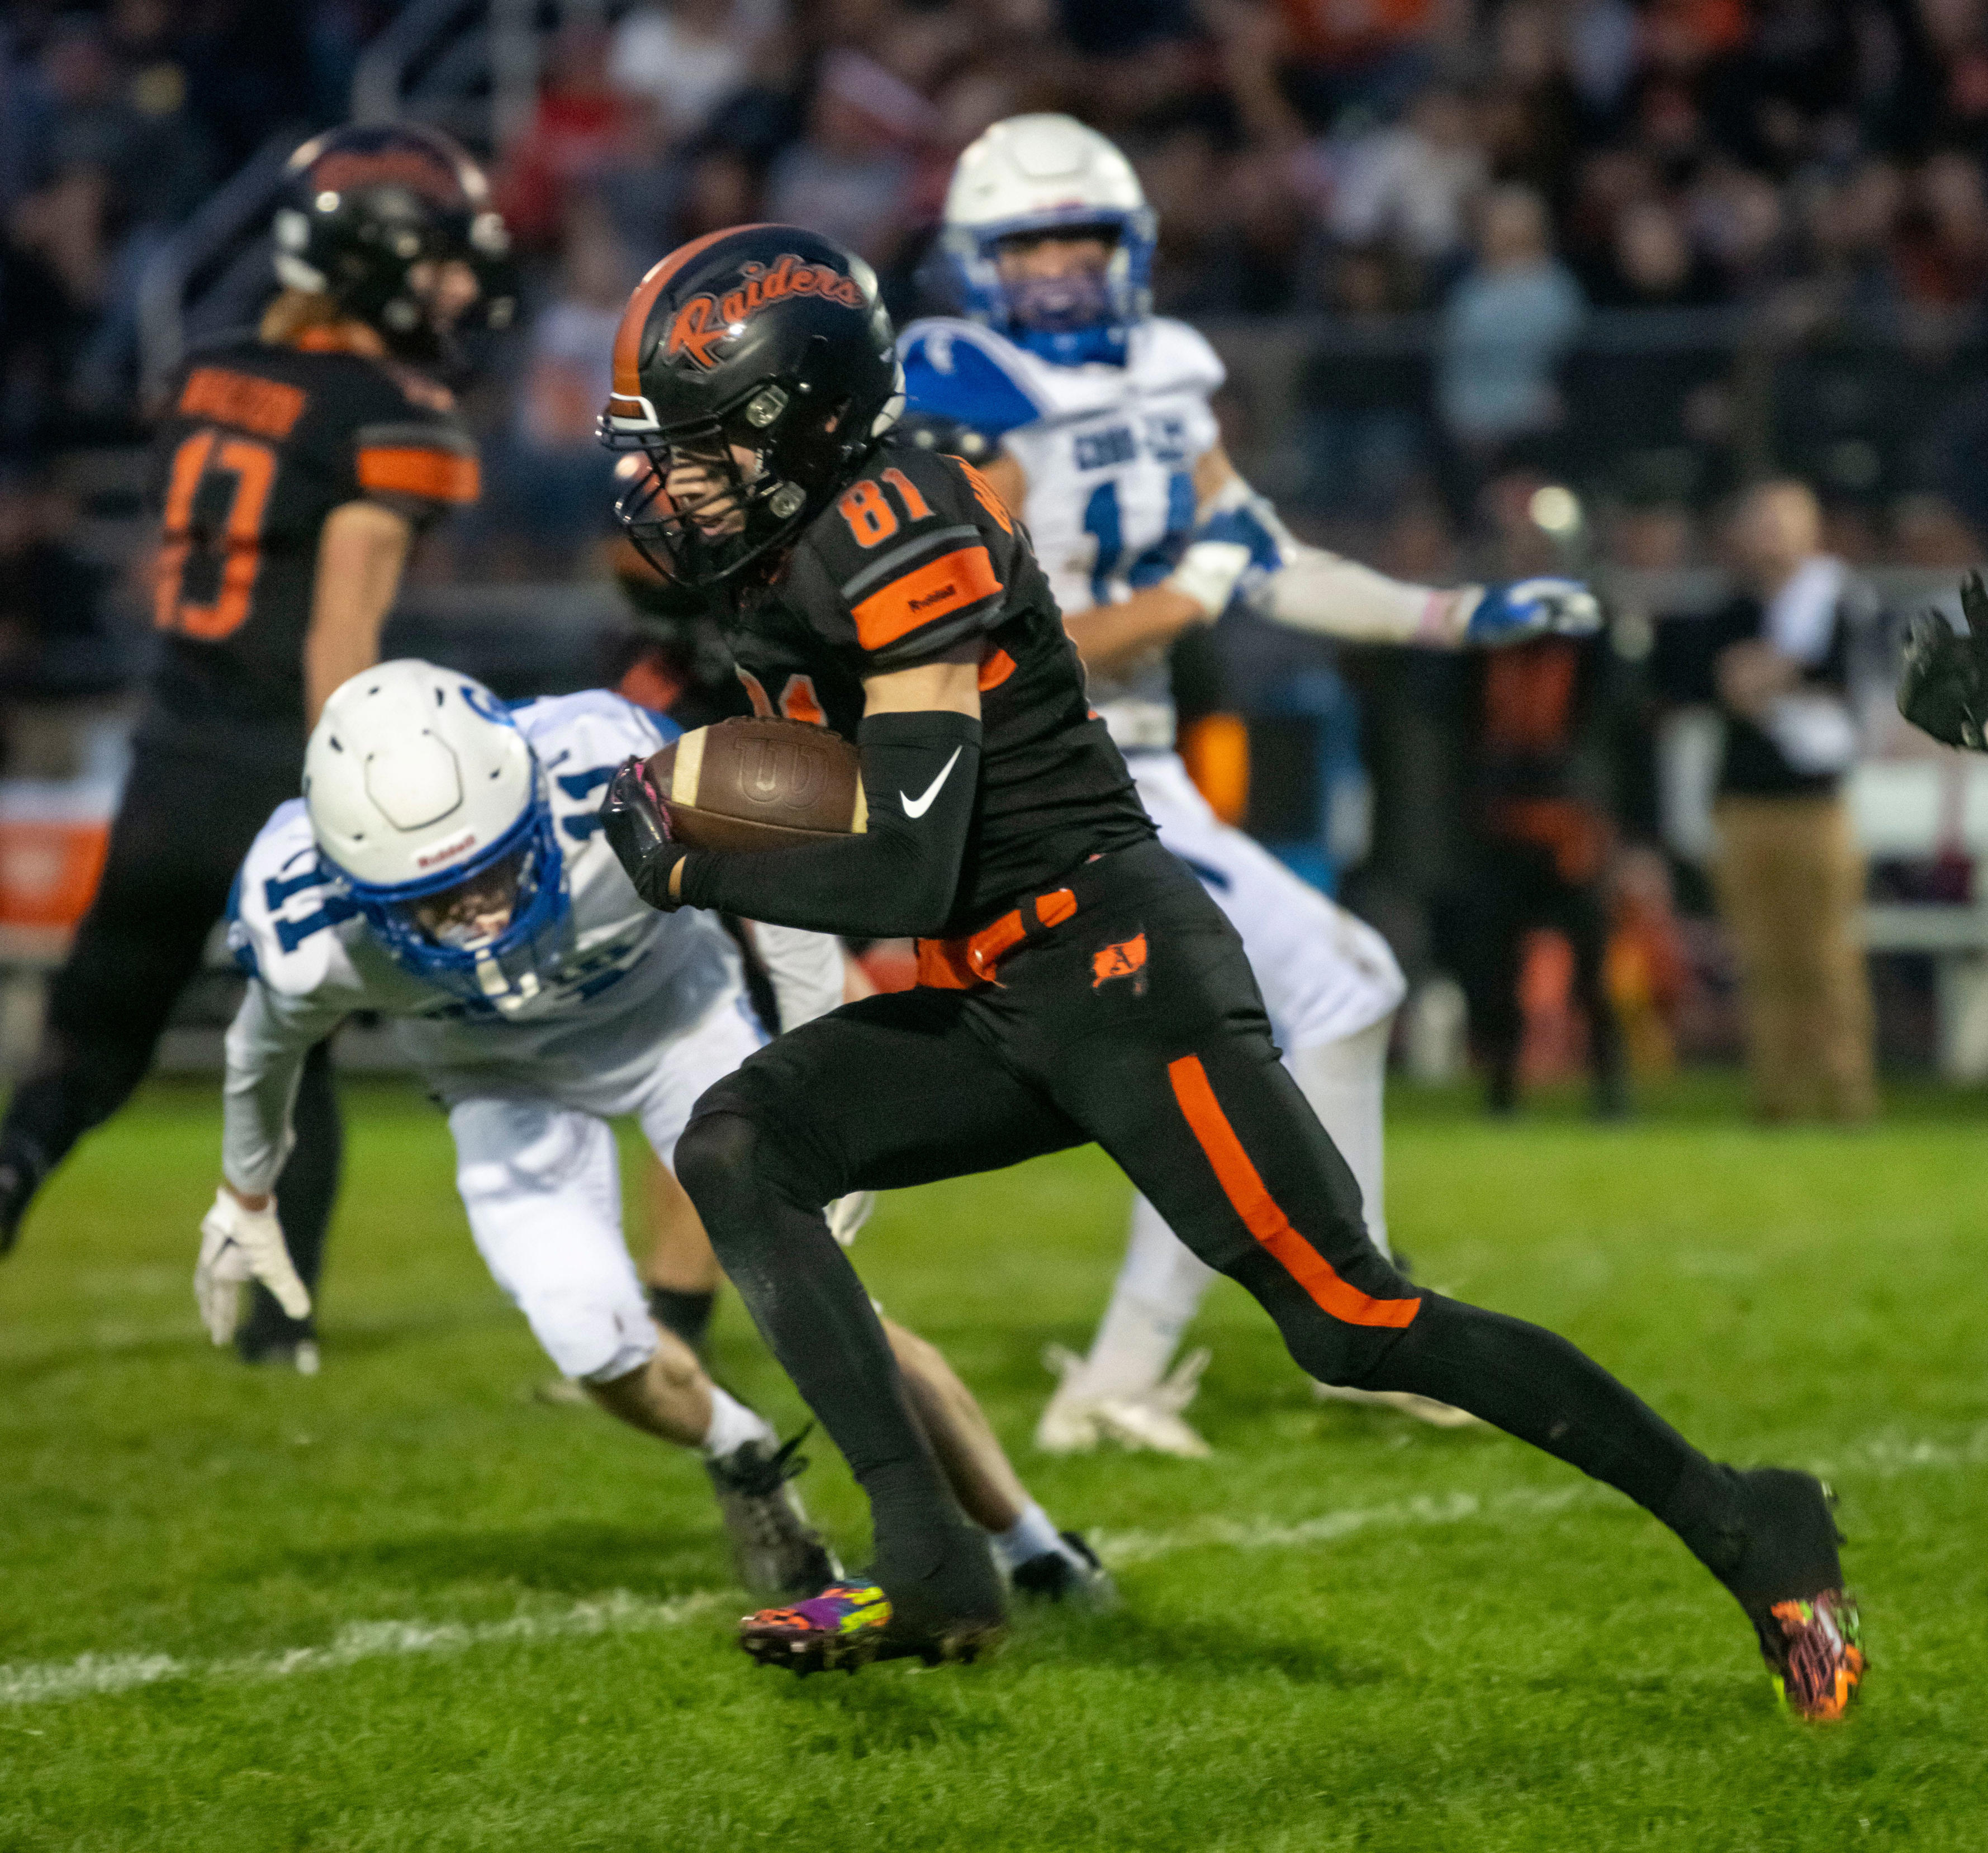 Almont football preparing for familiar playoff foe OvidElsie in state